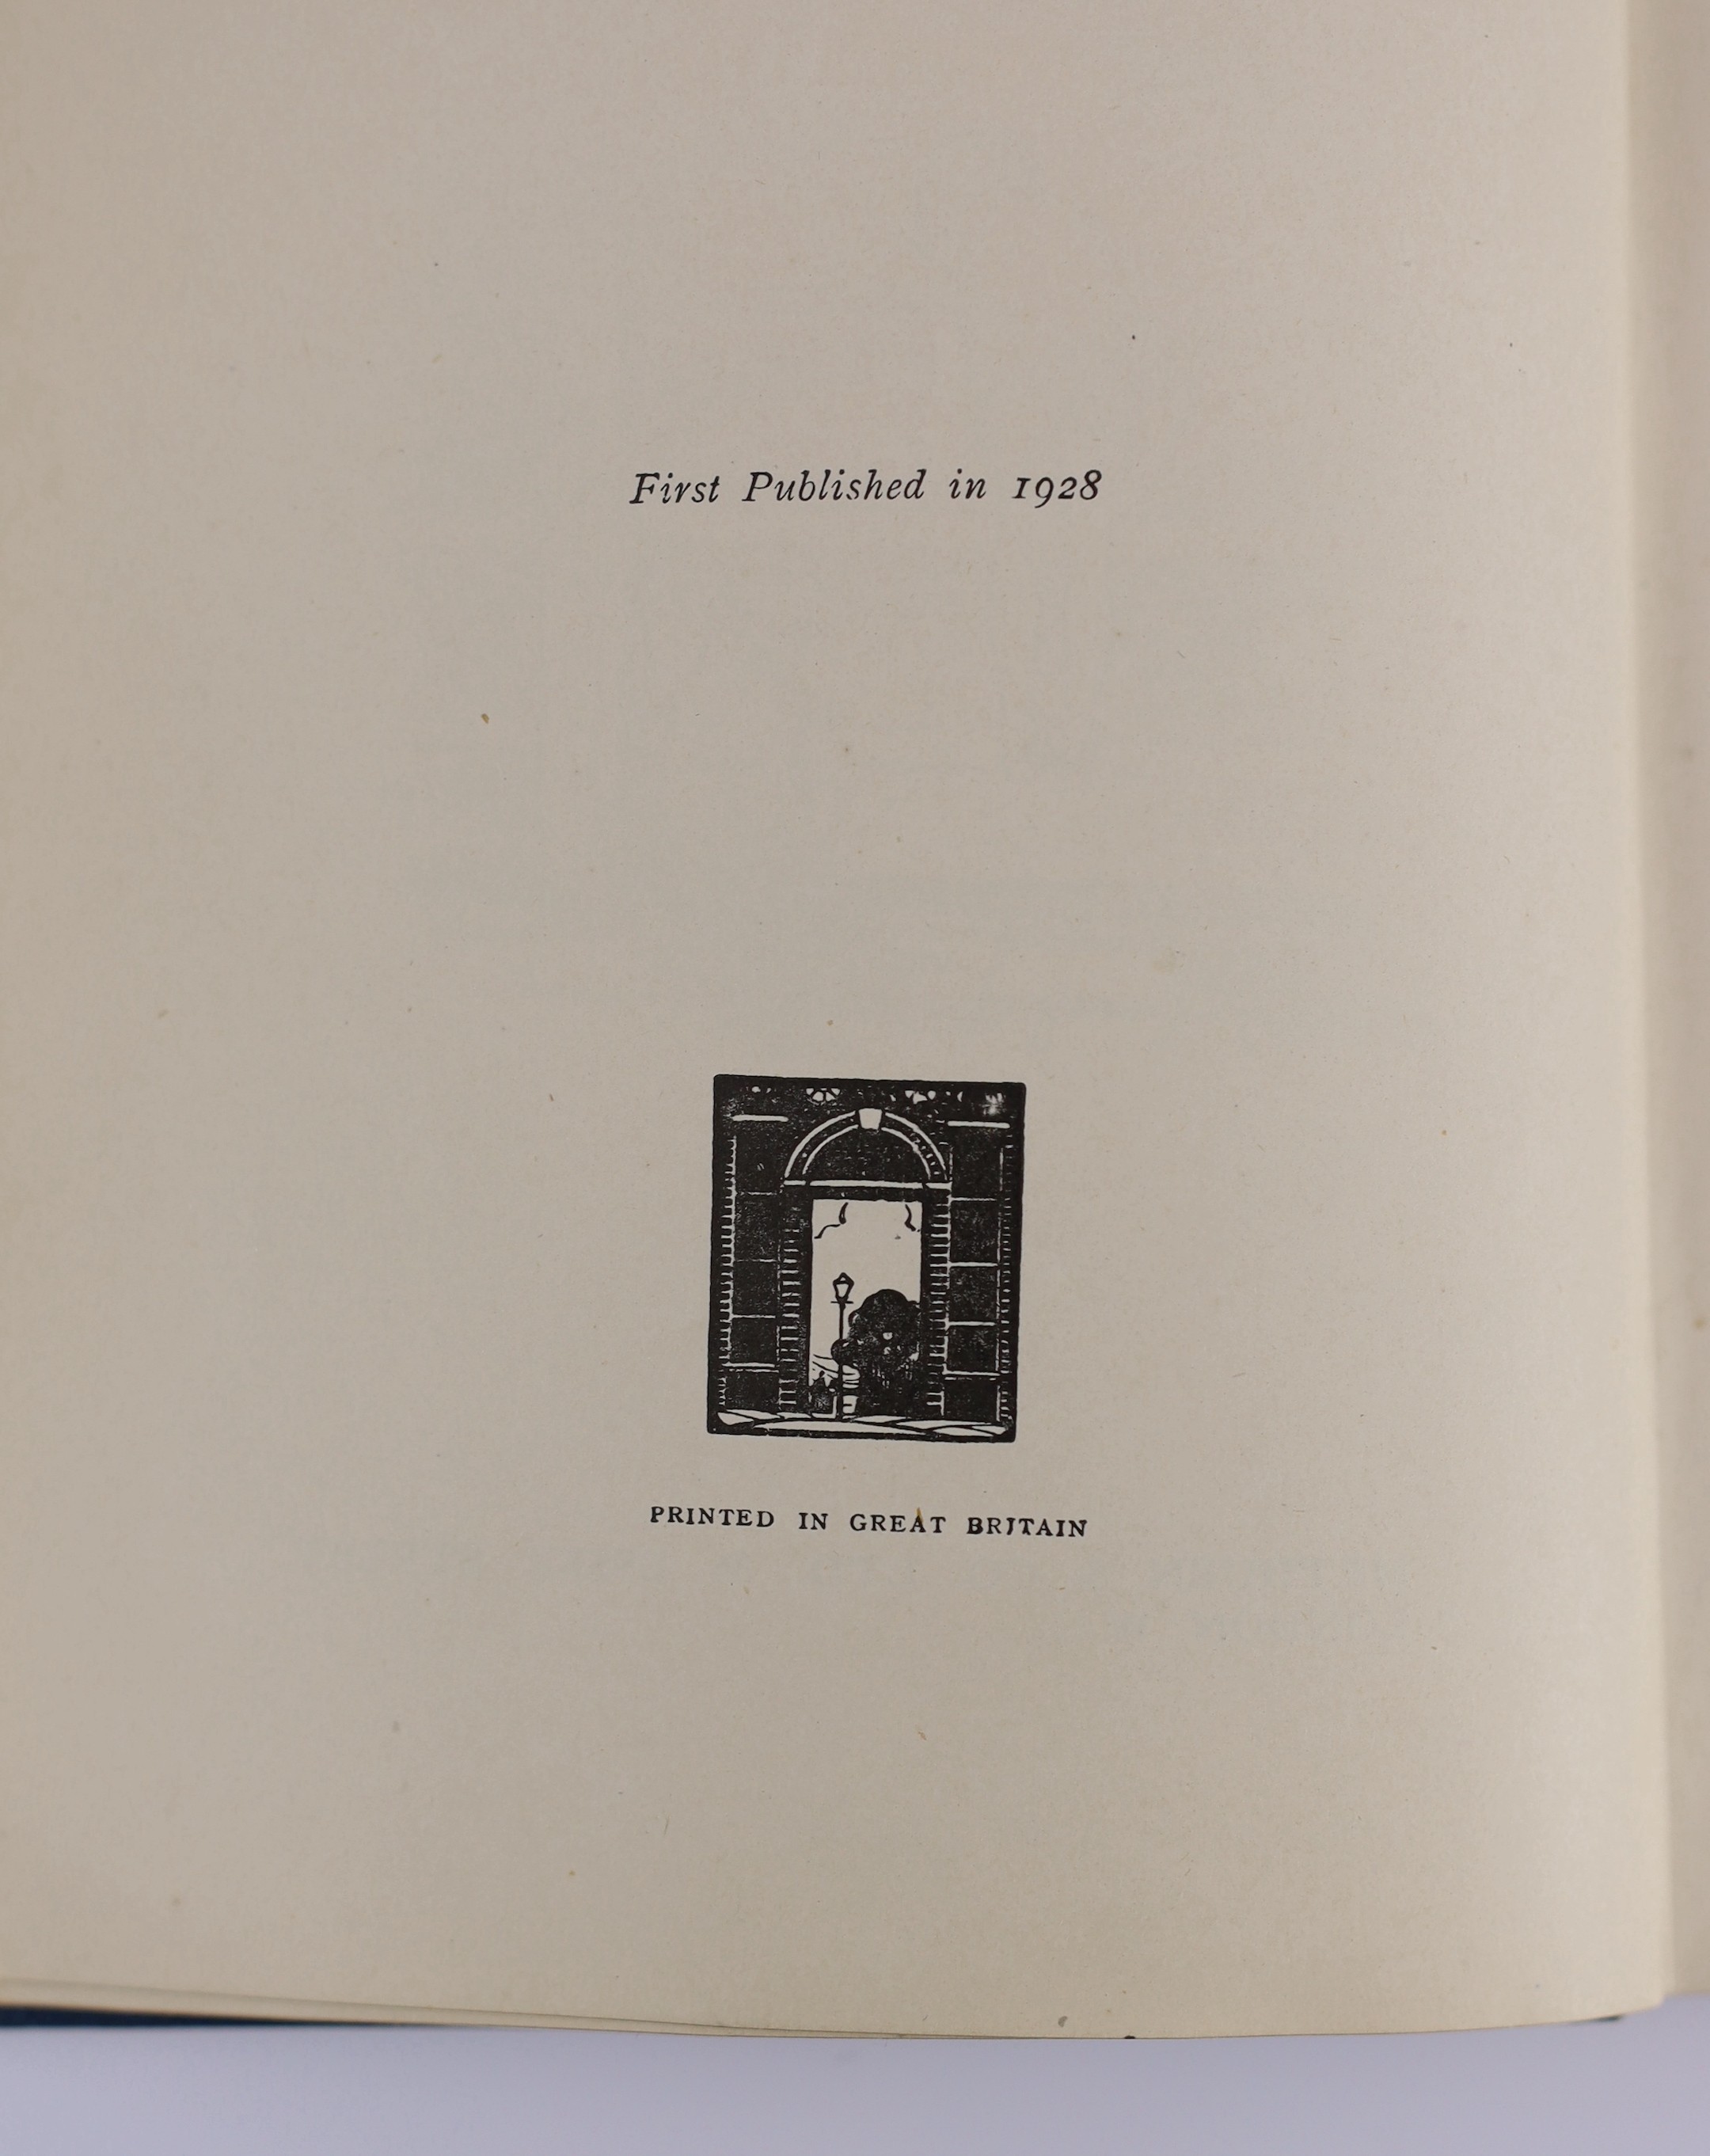 Milne, A.A. - Now We Are Six. First edition, illus. throughout (by Ernest Shepard, some full-page), half title, together with - The House at Pooh Corner. First edition. (illus. etc. as before); royal blue gilt decorated